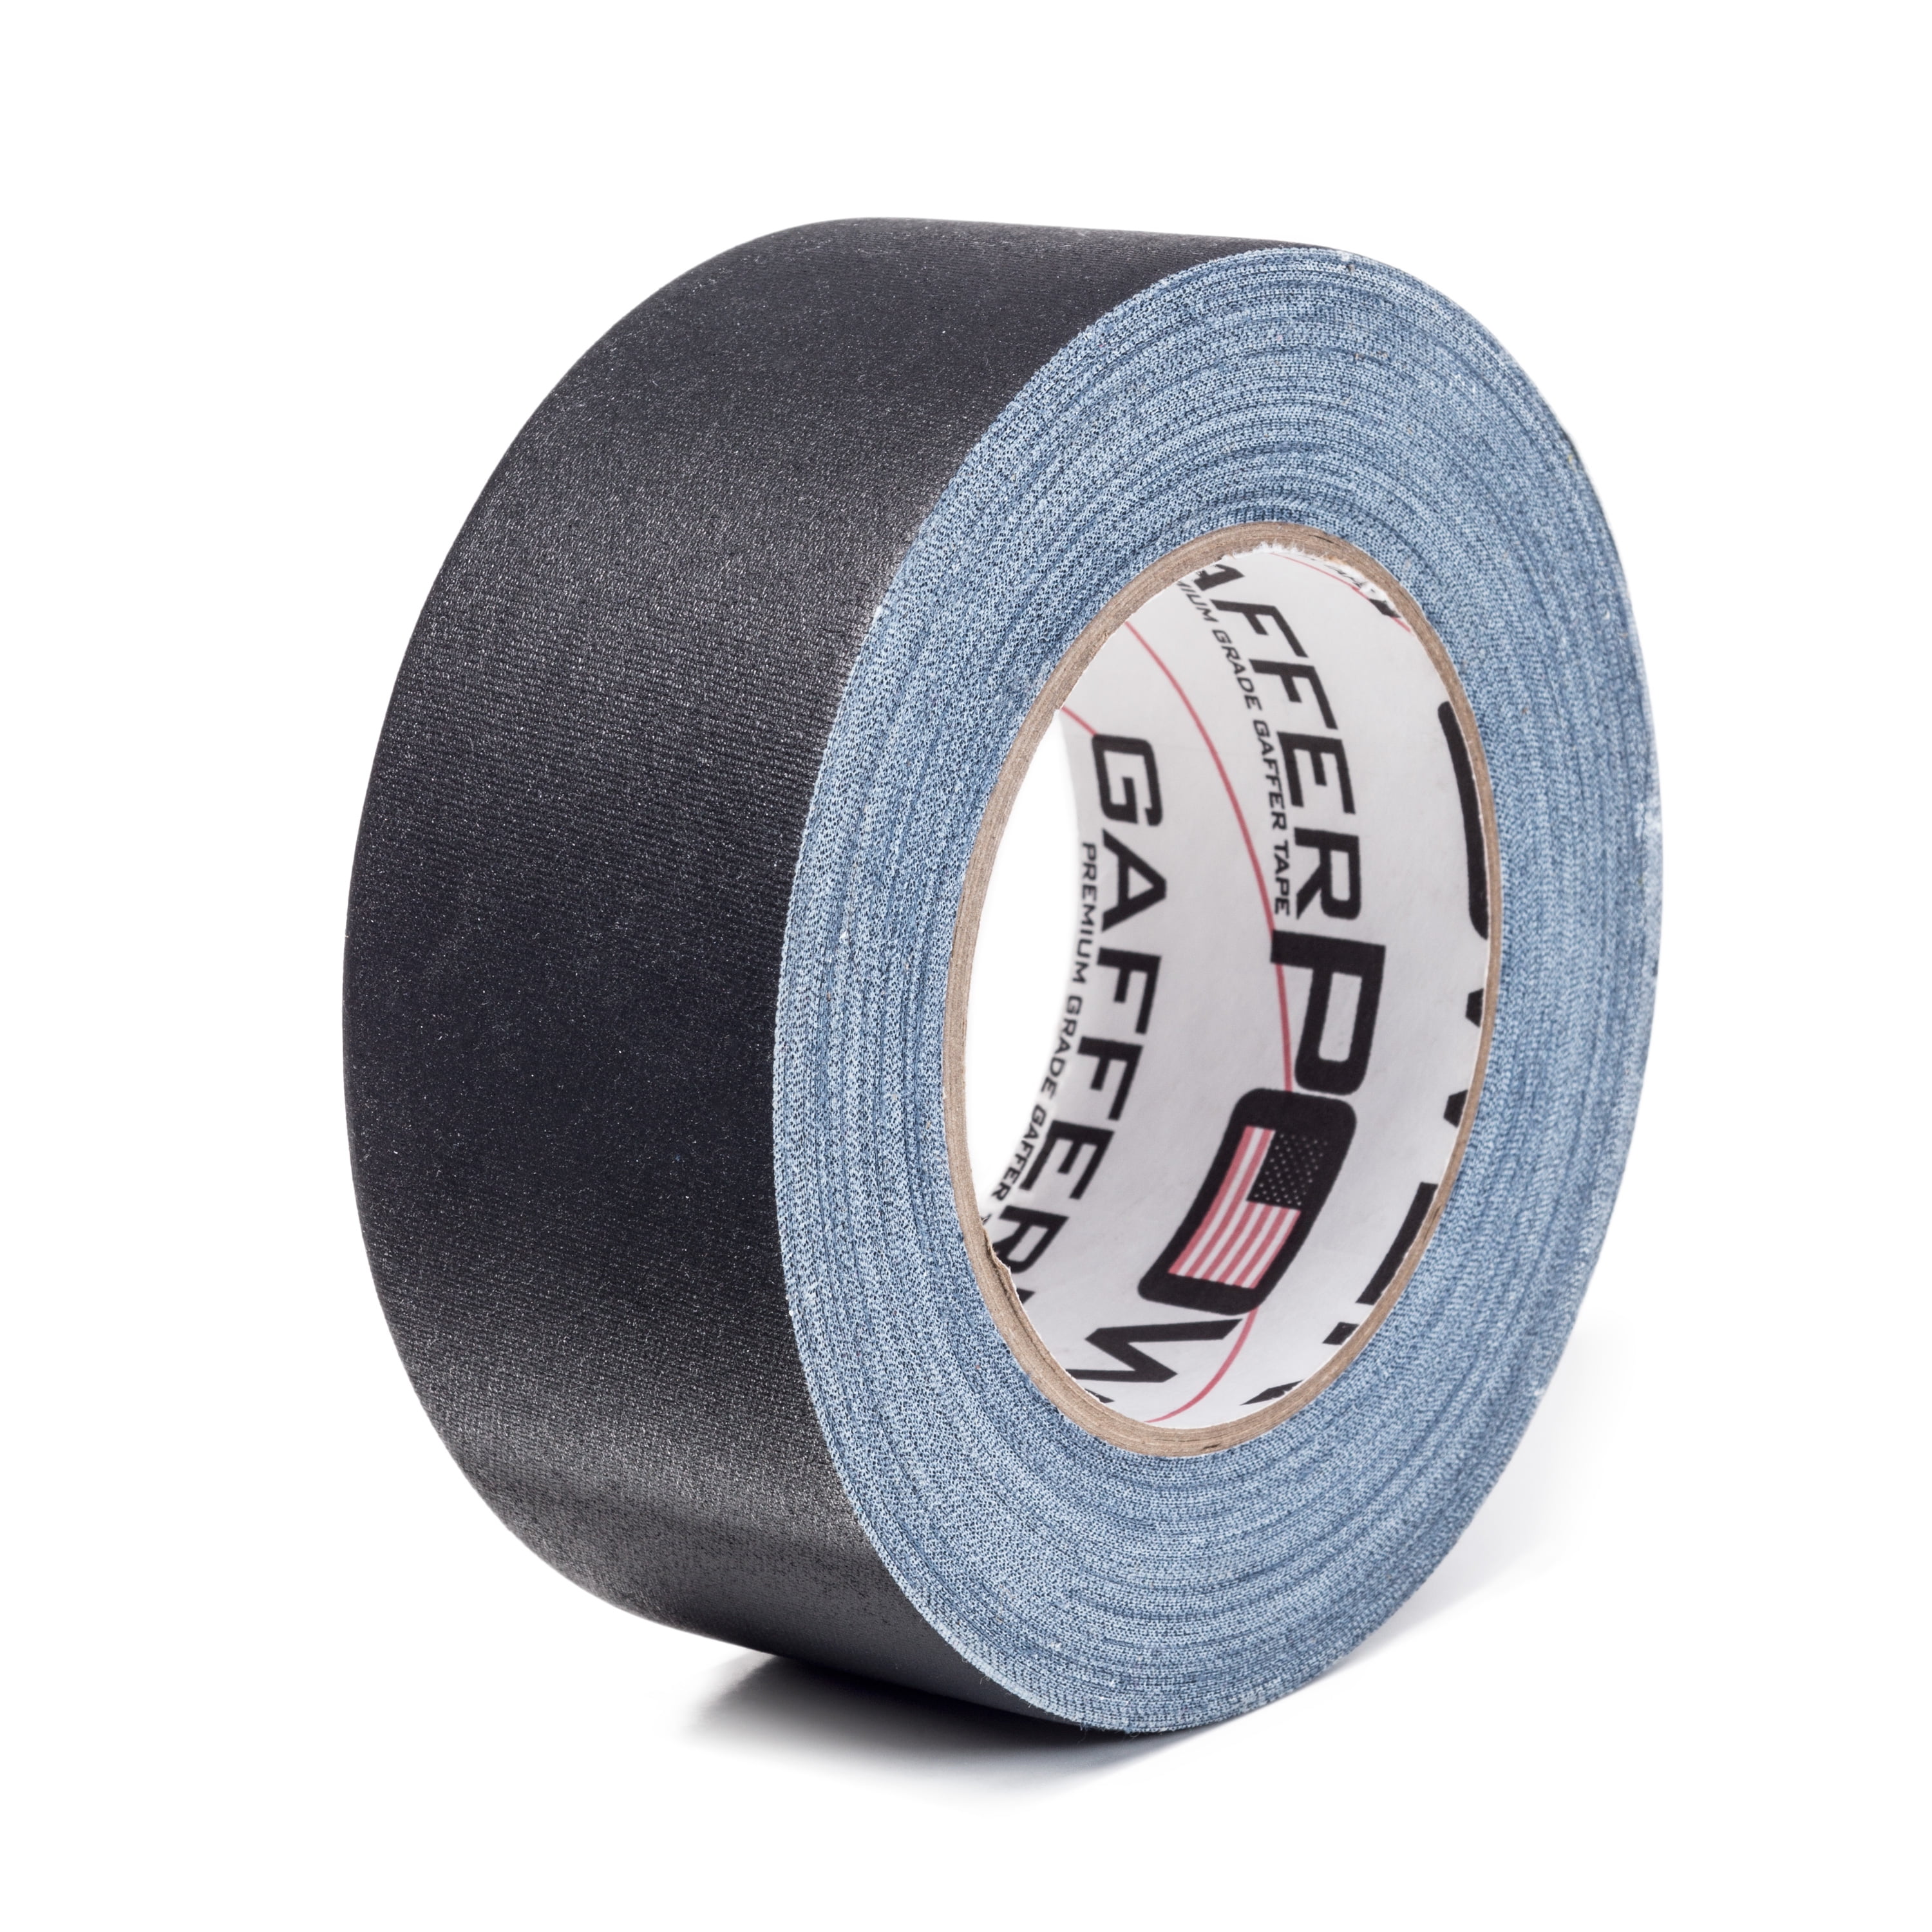 Pocket Pro Gaff Fluorescent Blue Gaffers Tape 1 inch X 6  yards on 1 inch core 